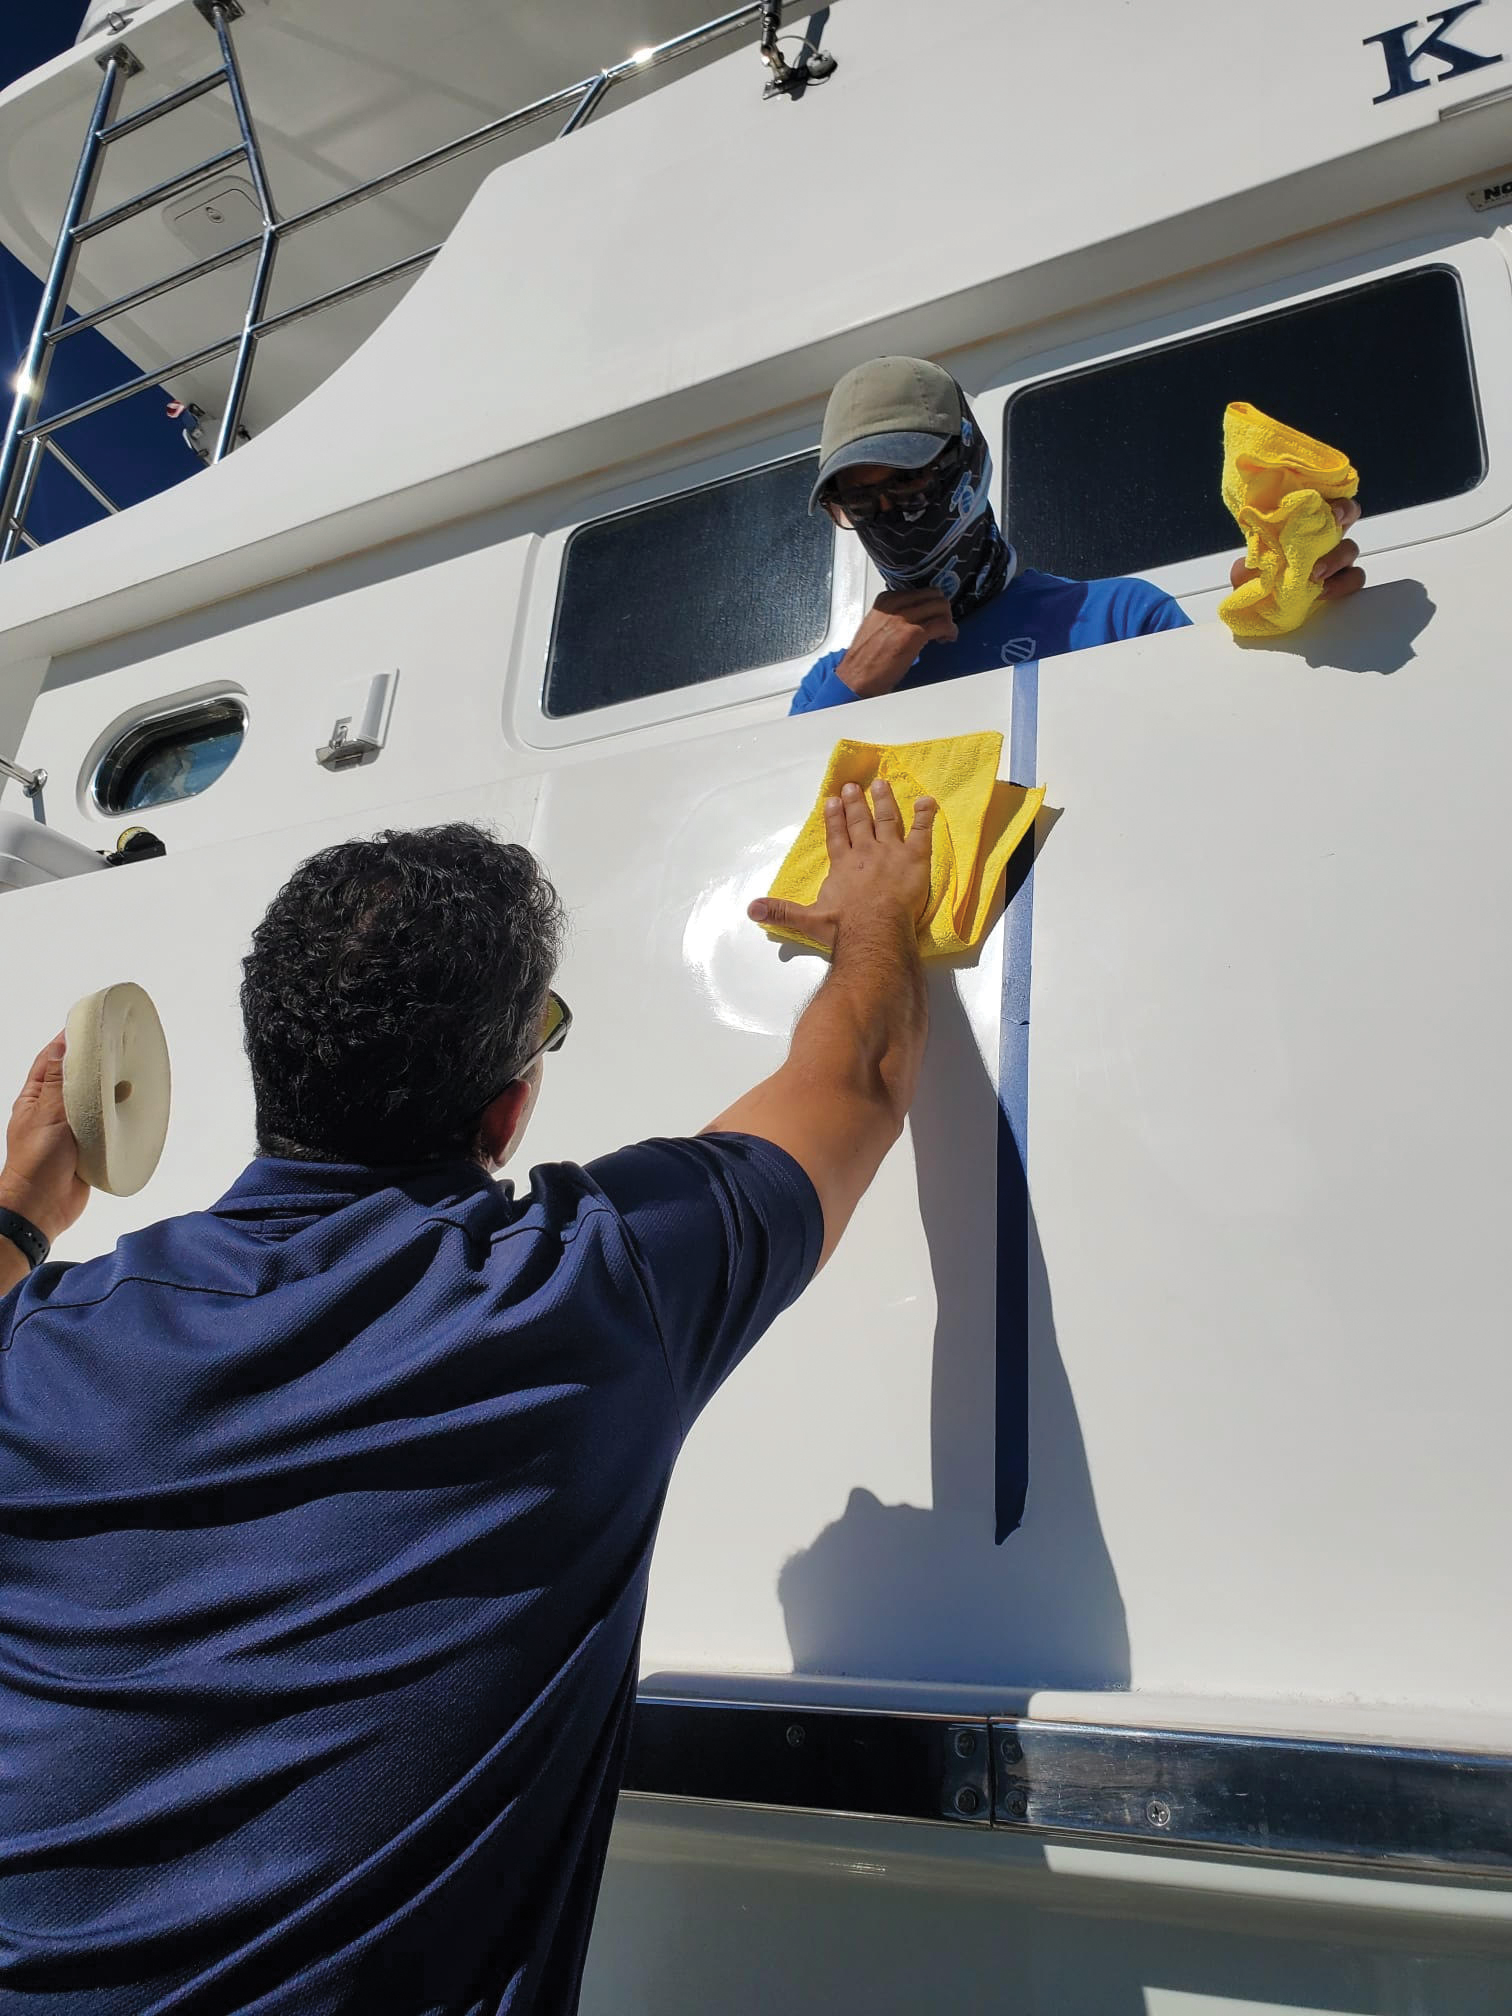 How to Protect Your Boat’s Finish with Ceramic Coating